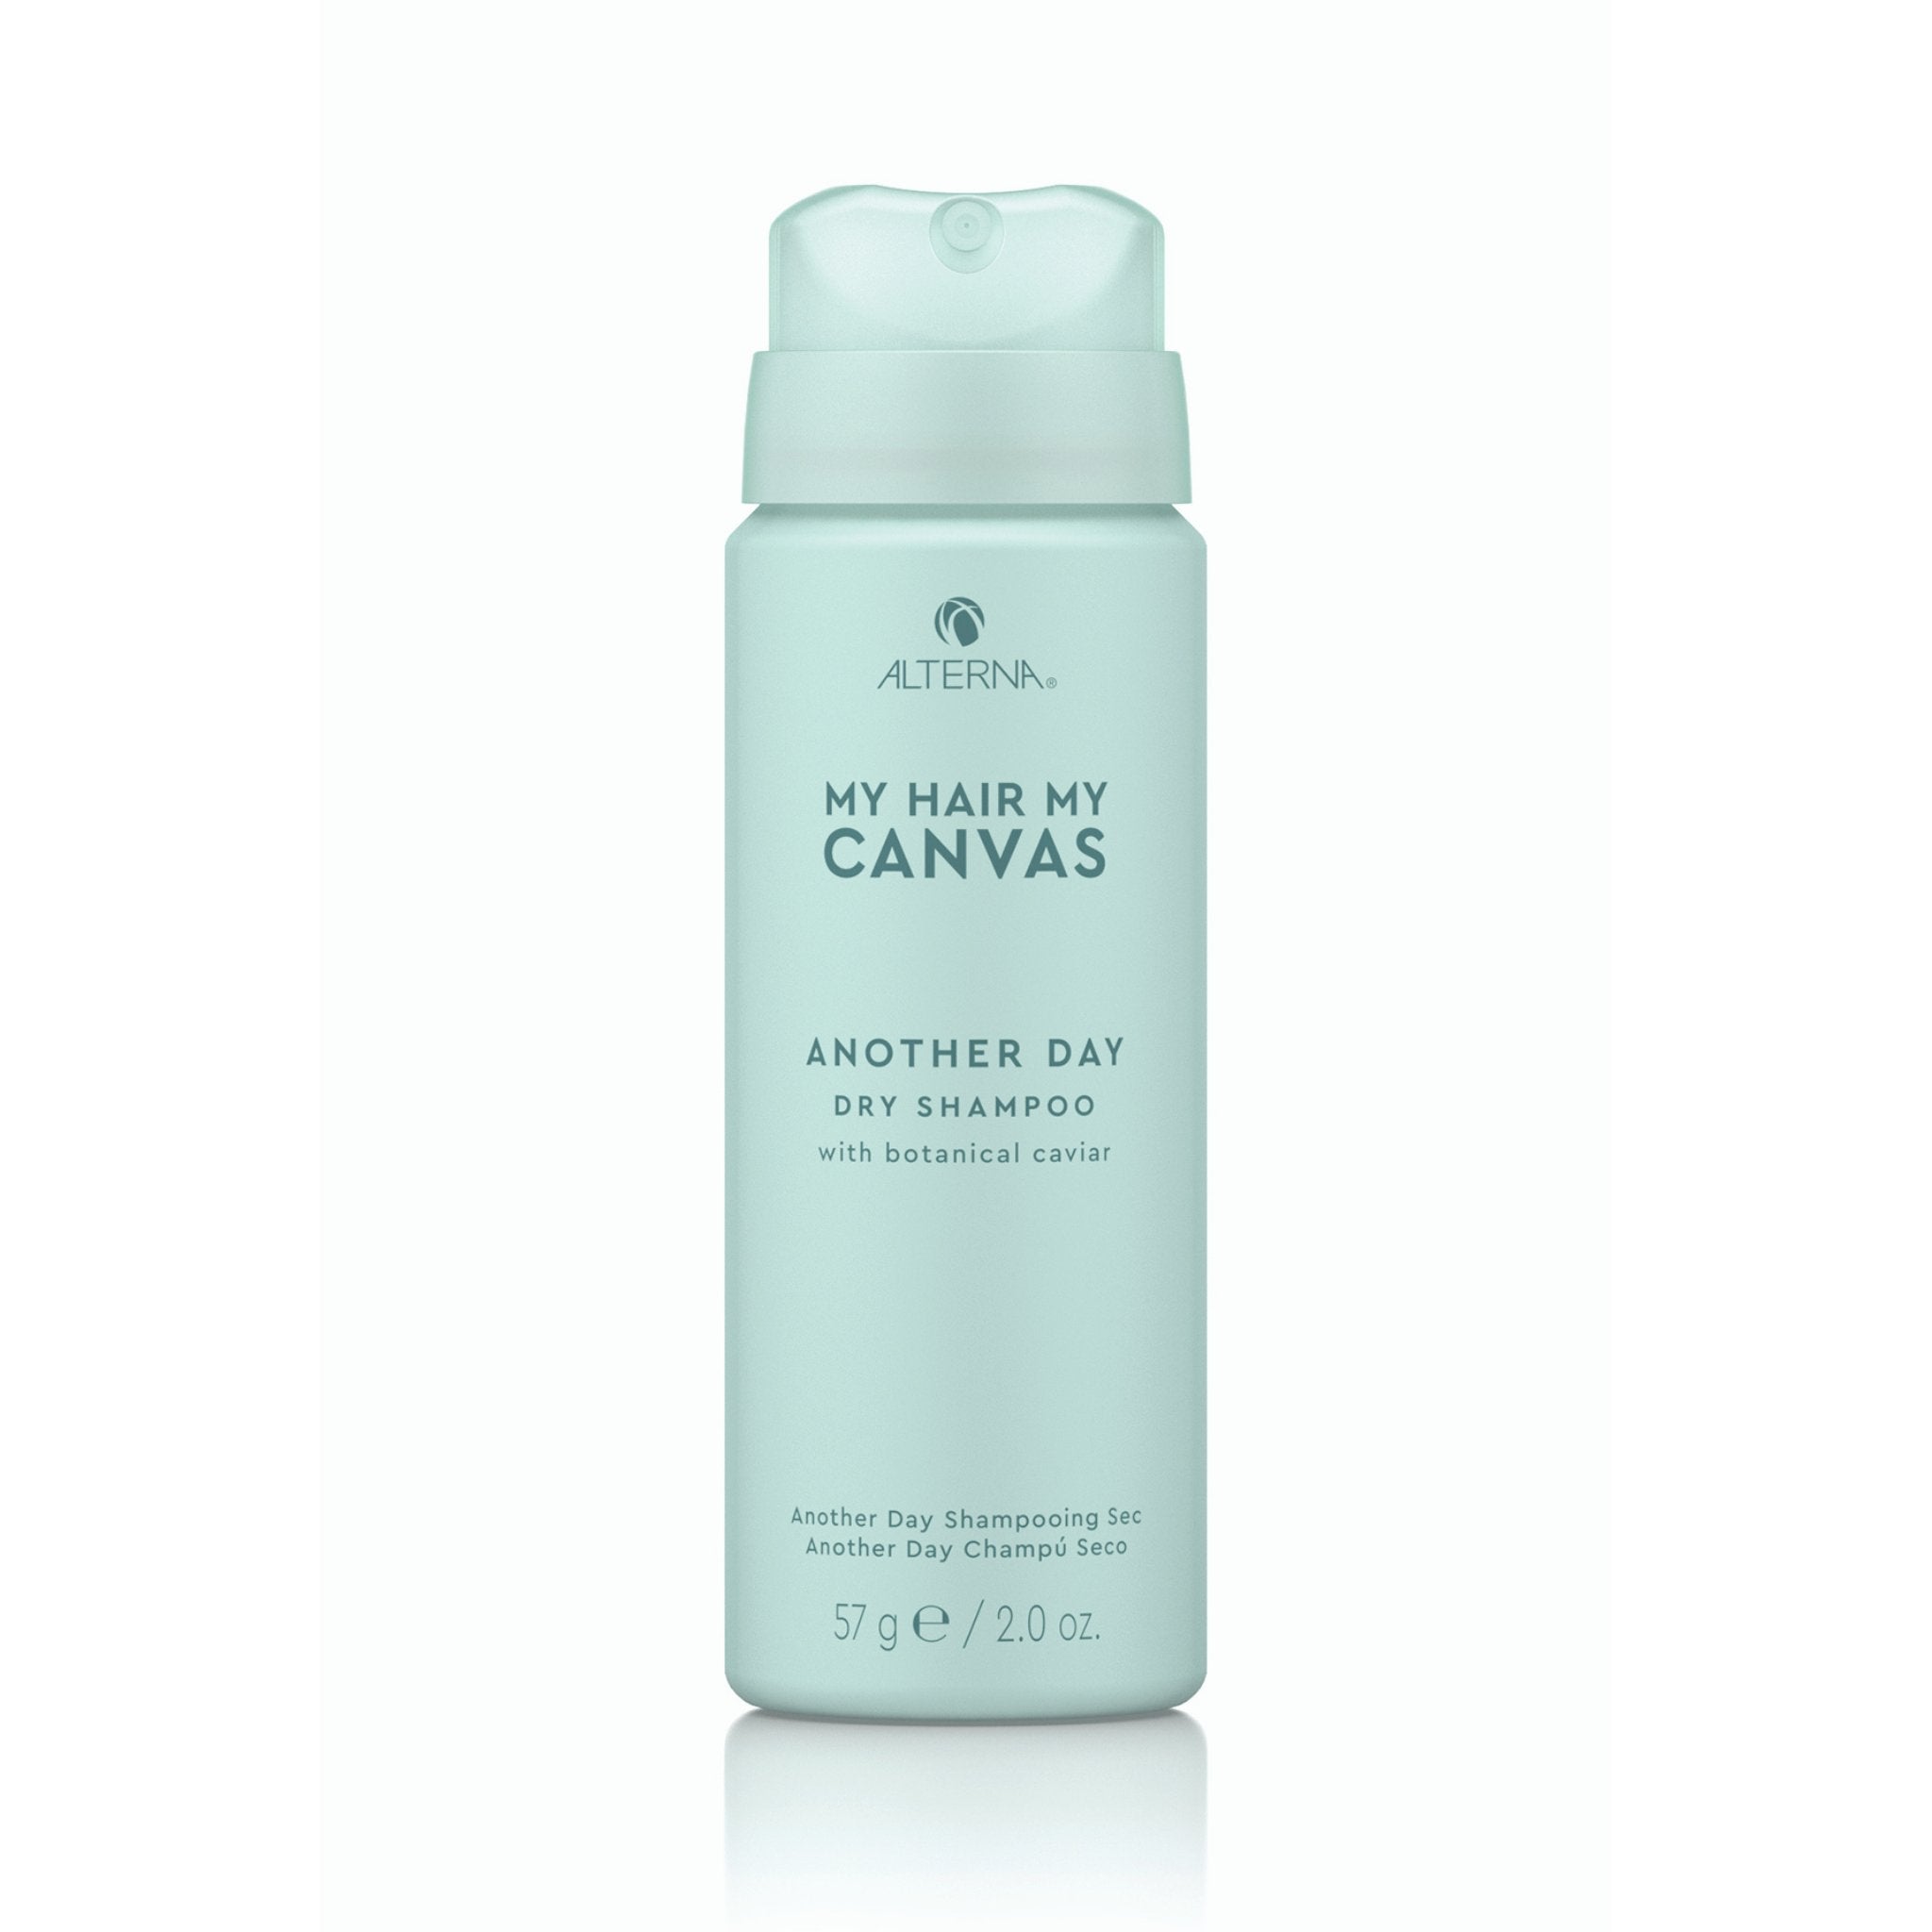 Alterna. My Hair My Canvas Shampoing Sec Another Day - 57 g - Concept C. Shop